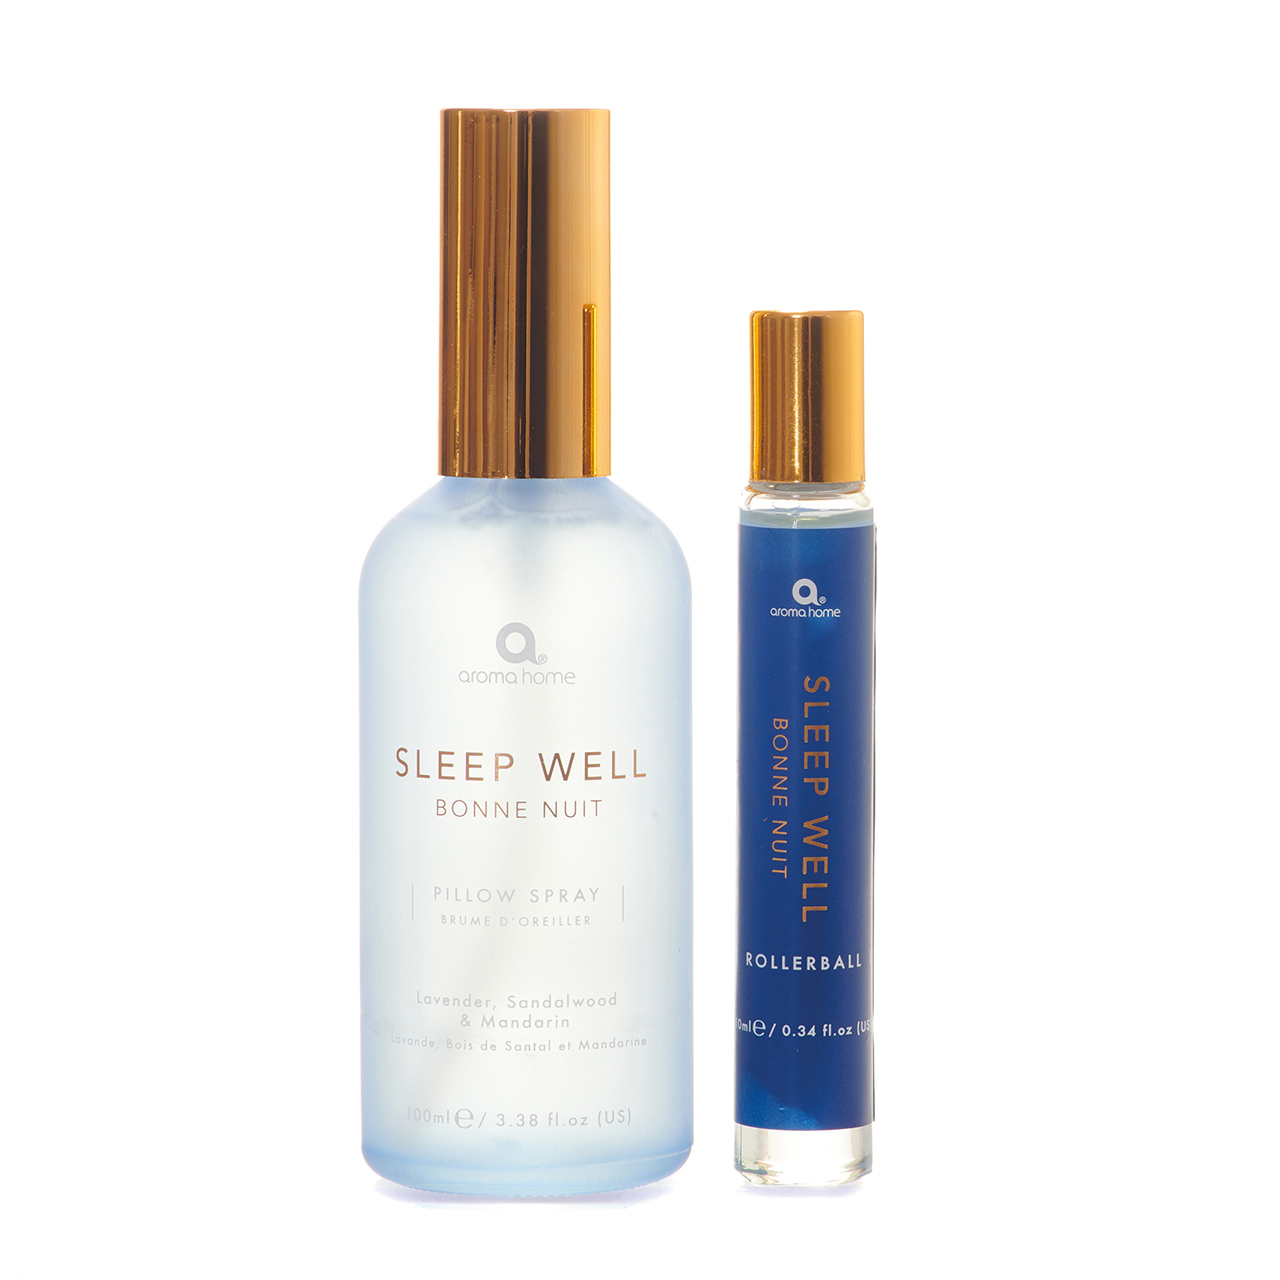 Pillow Spray and Rollerball Set